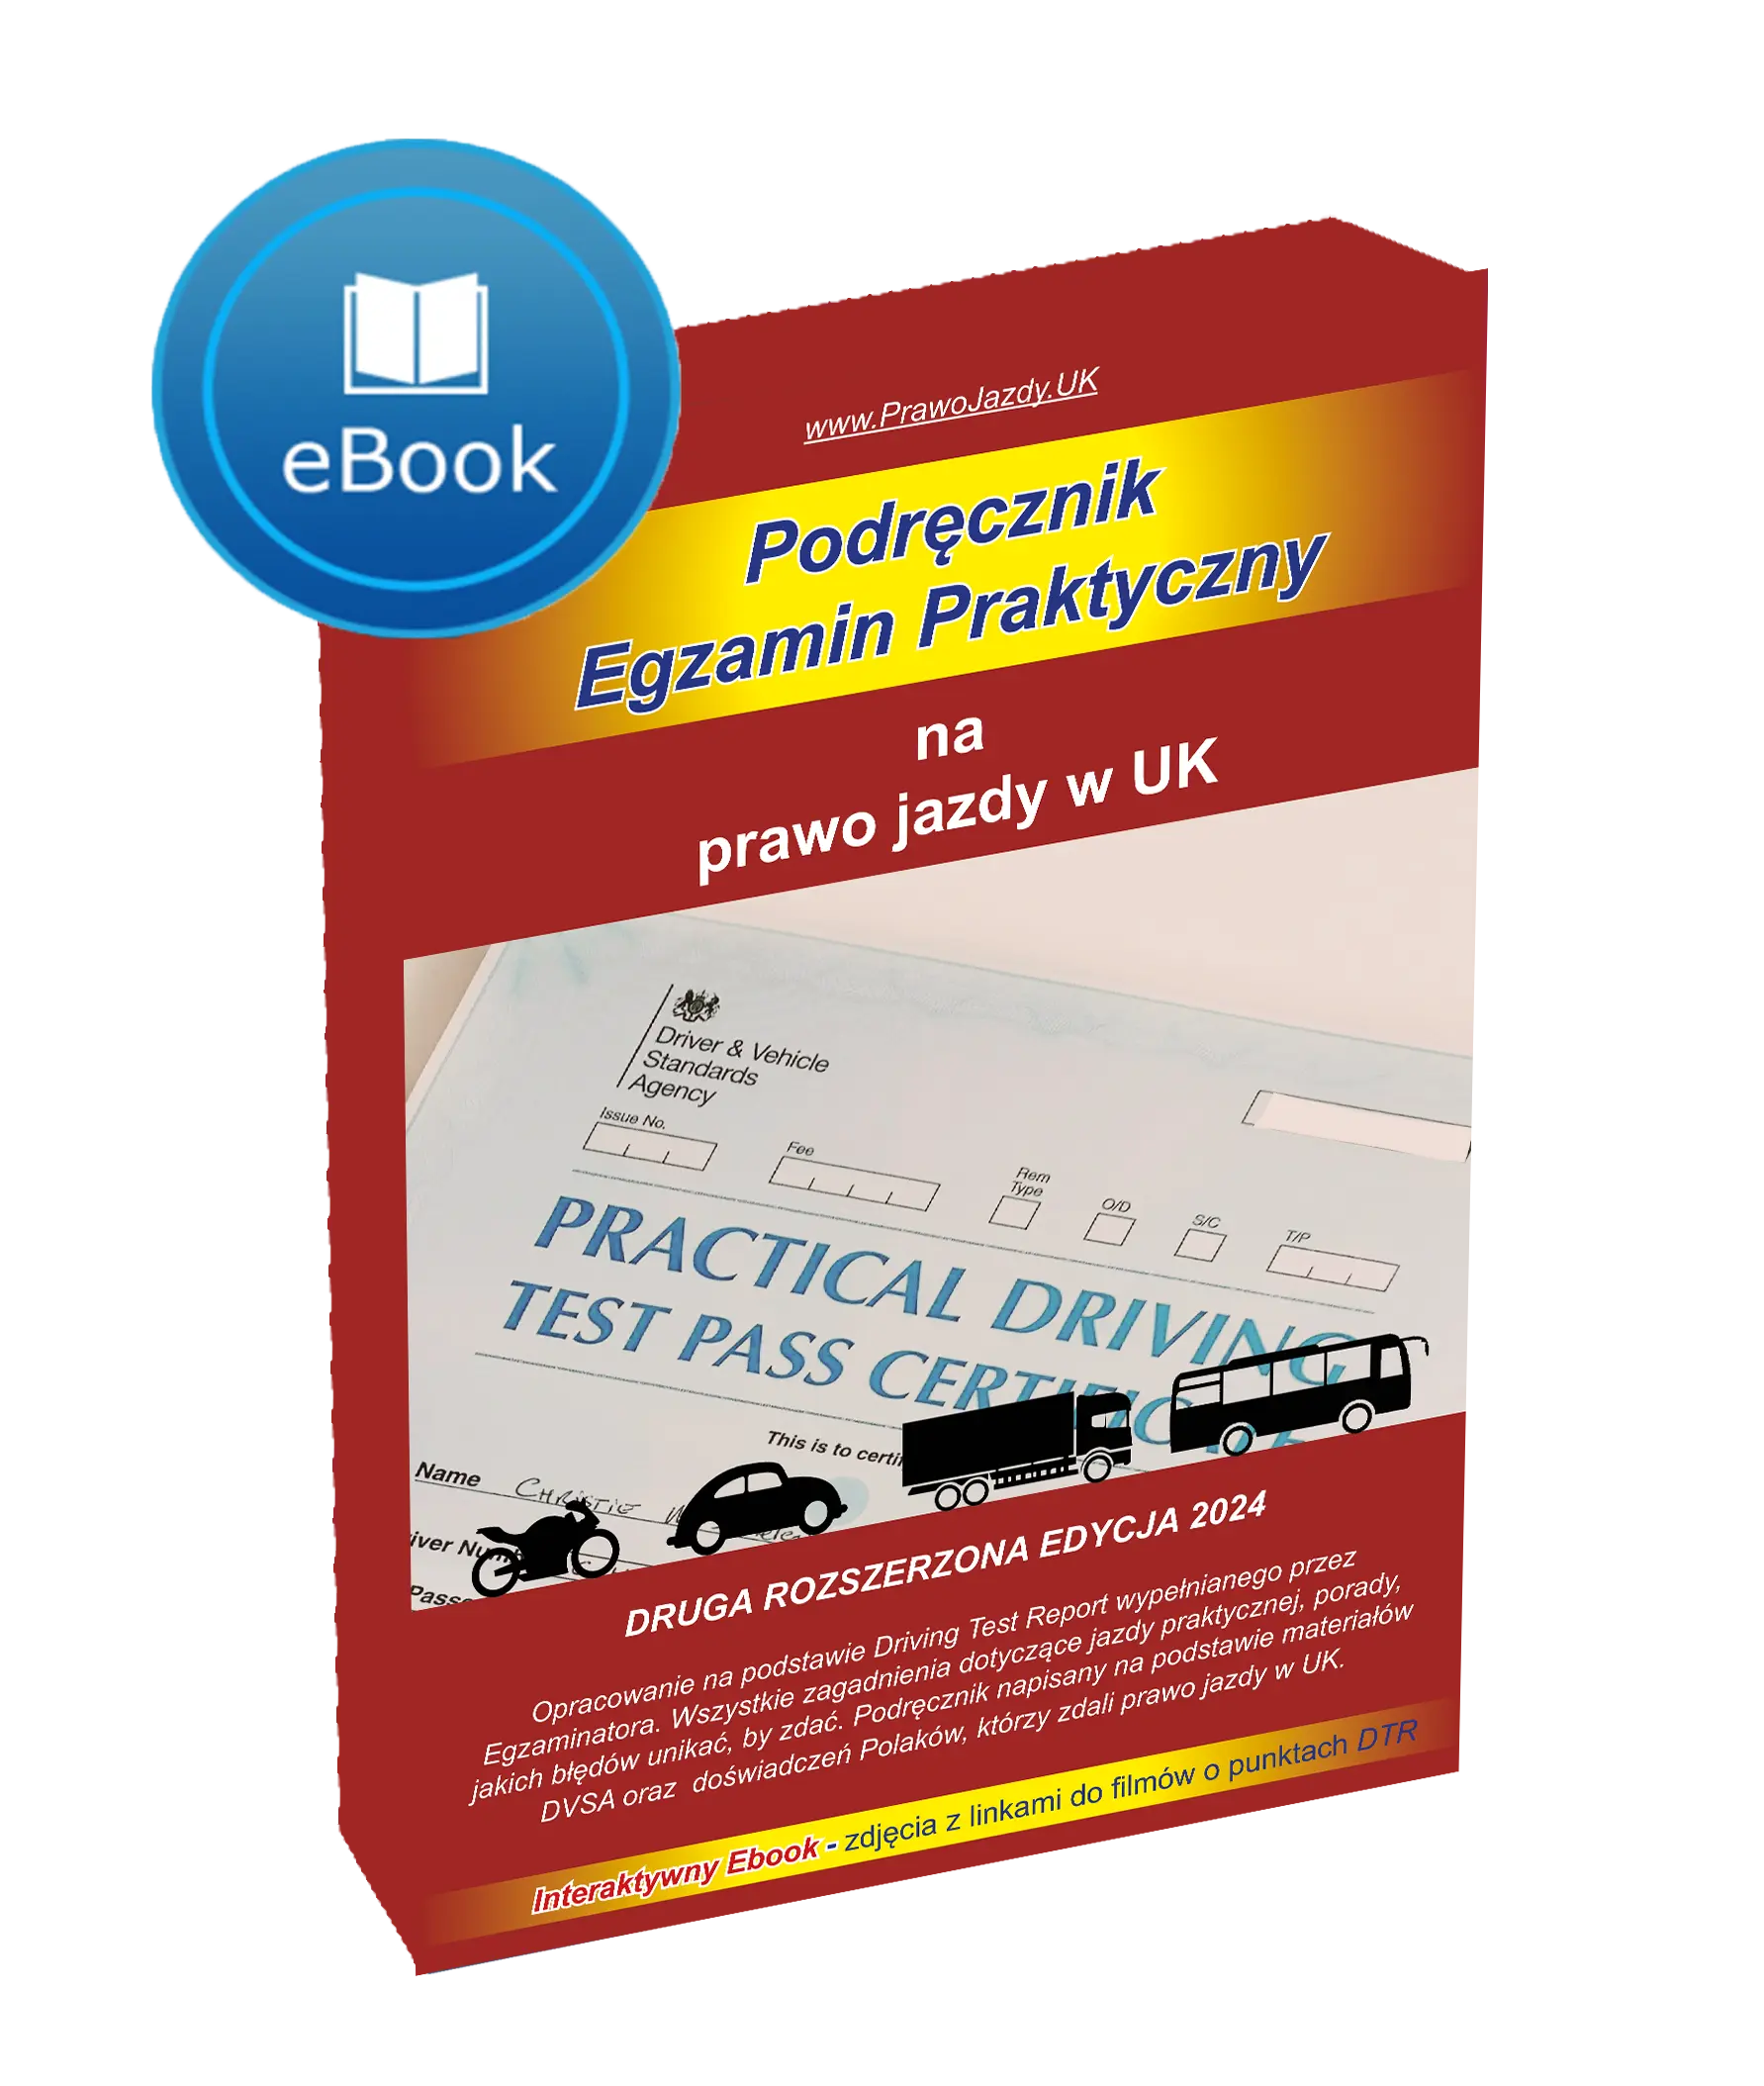 Where to pass get Practical test driving exam in Polish language book